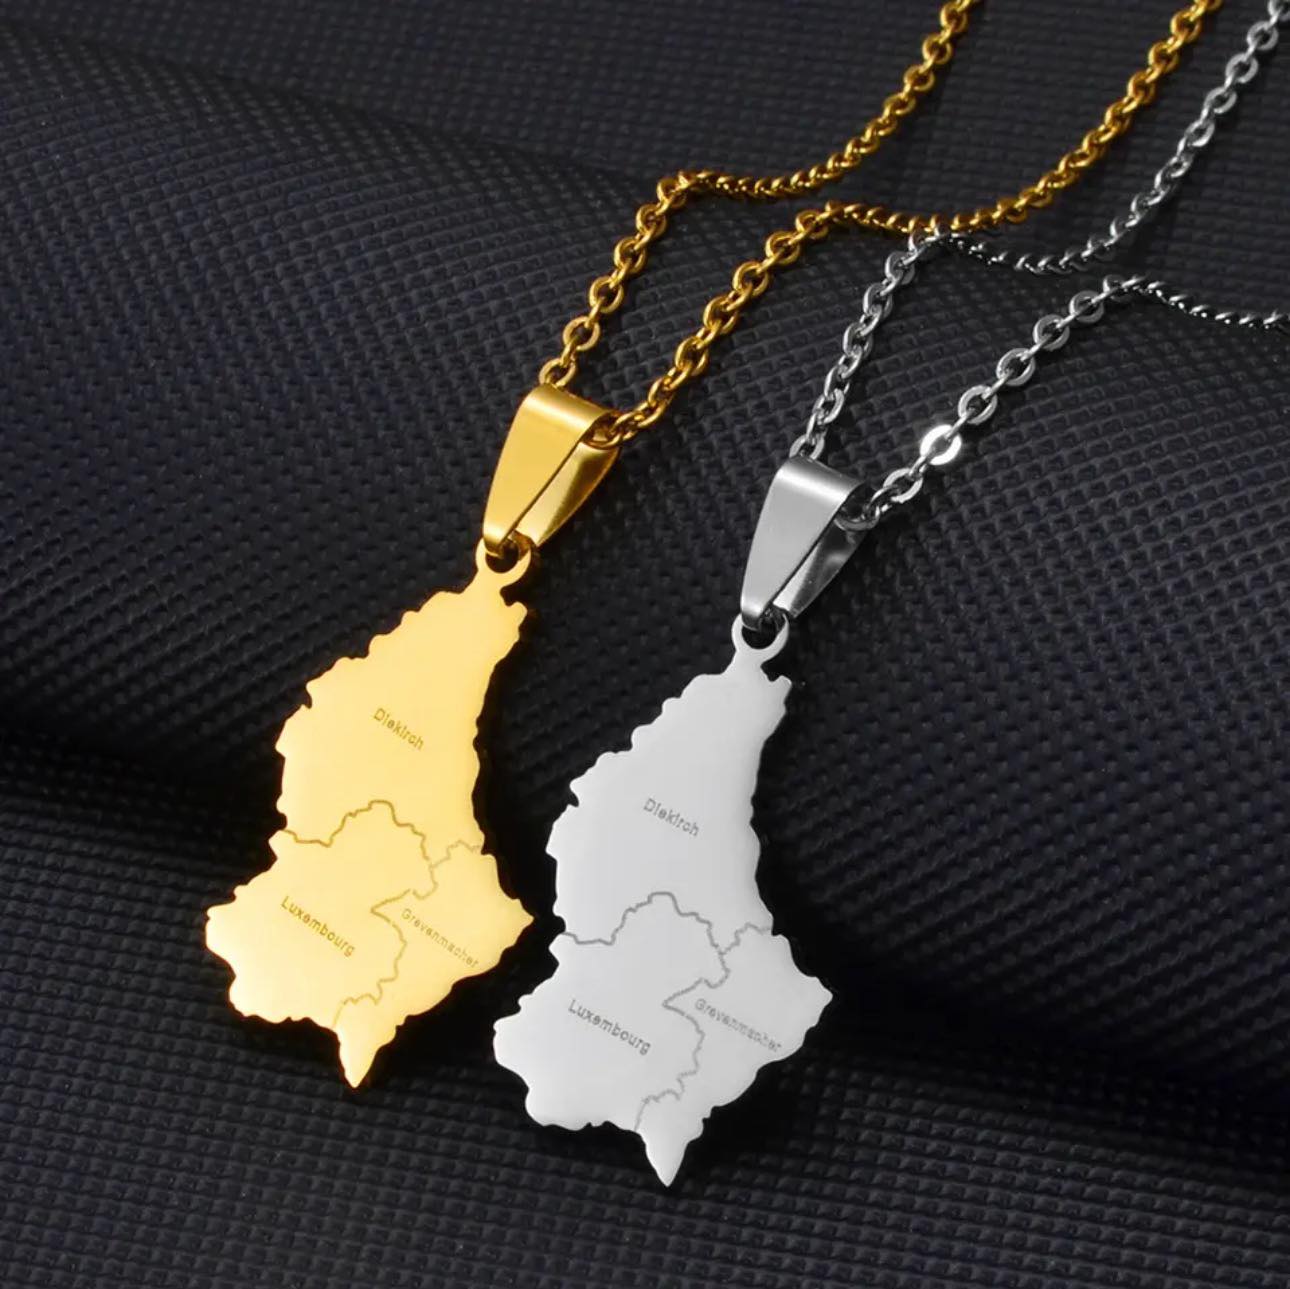 Luxembourg Map & Cities Necklace